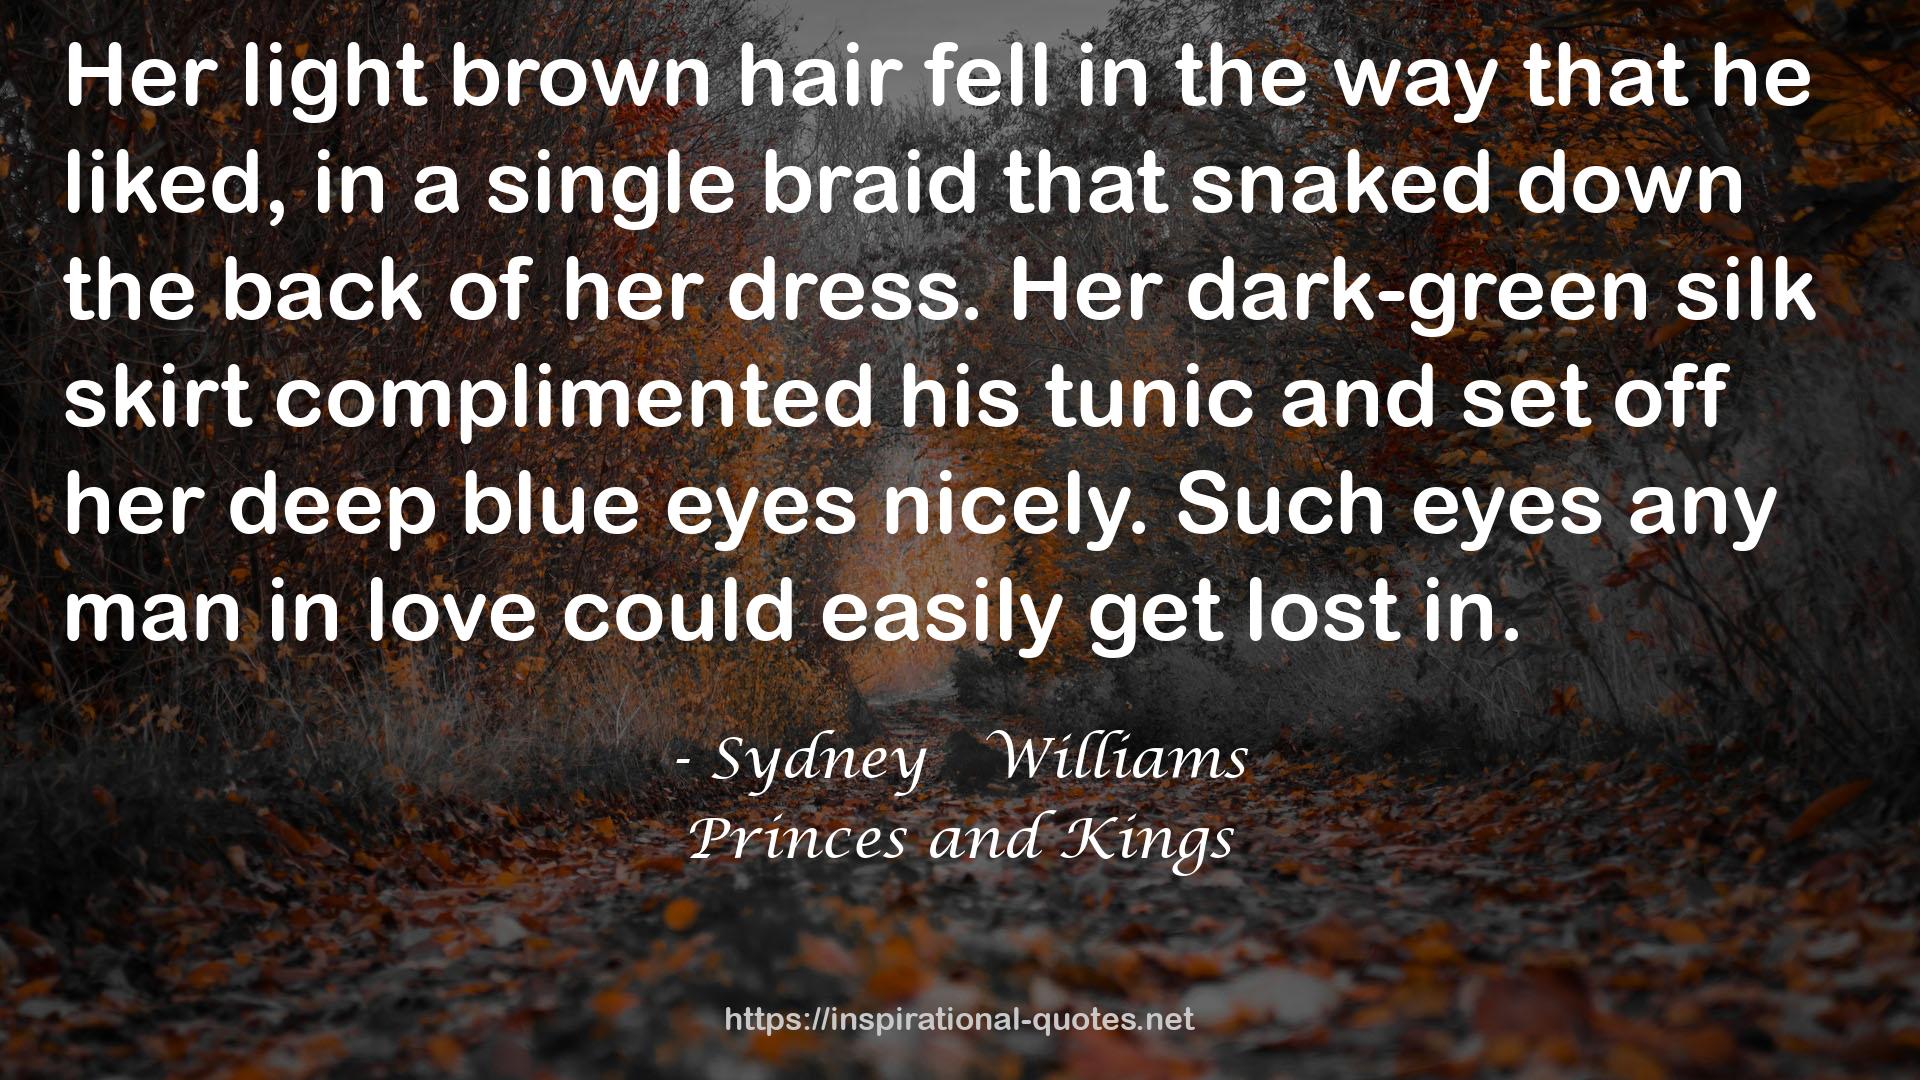 Princes and Kings QUOTES